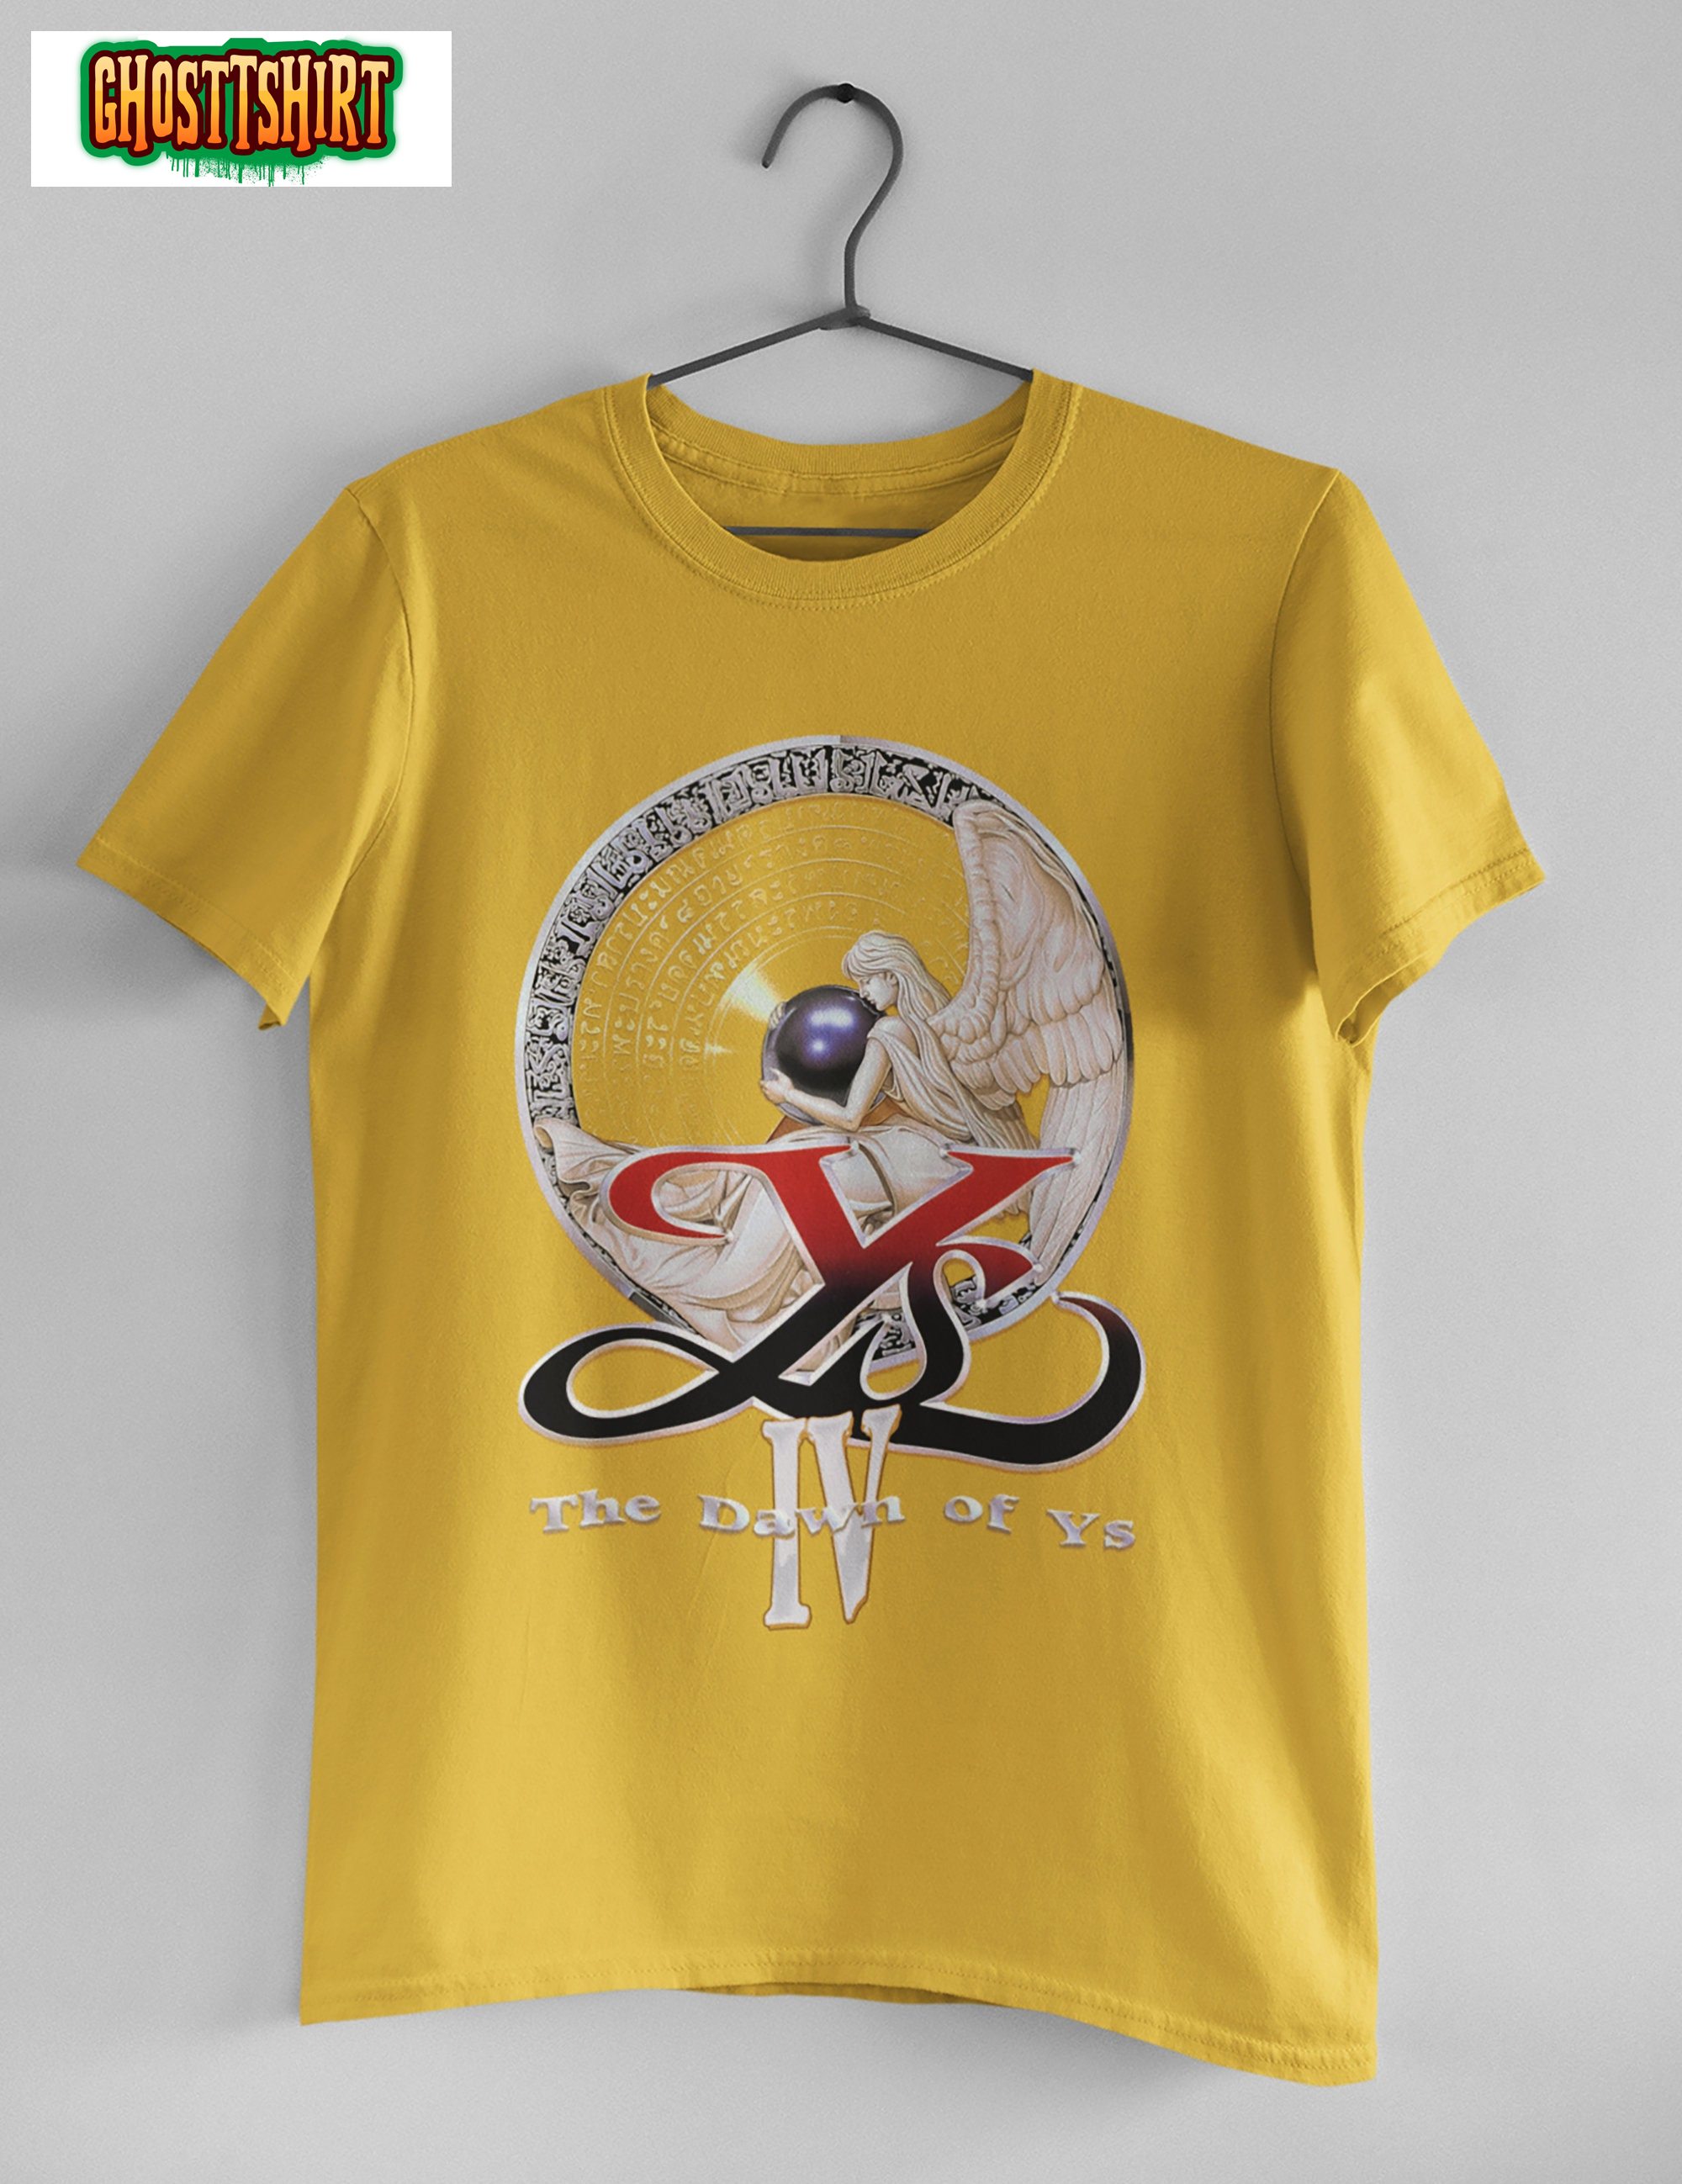 Ys IV The Dawn of Ys Action JRPG Unisex T-Shirt